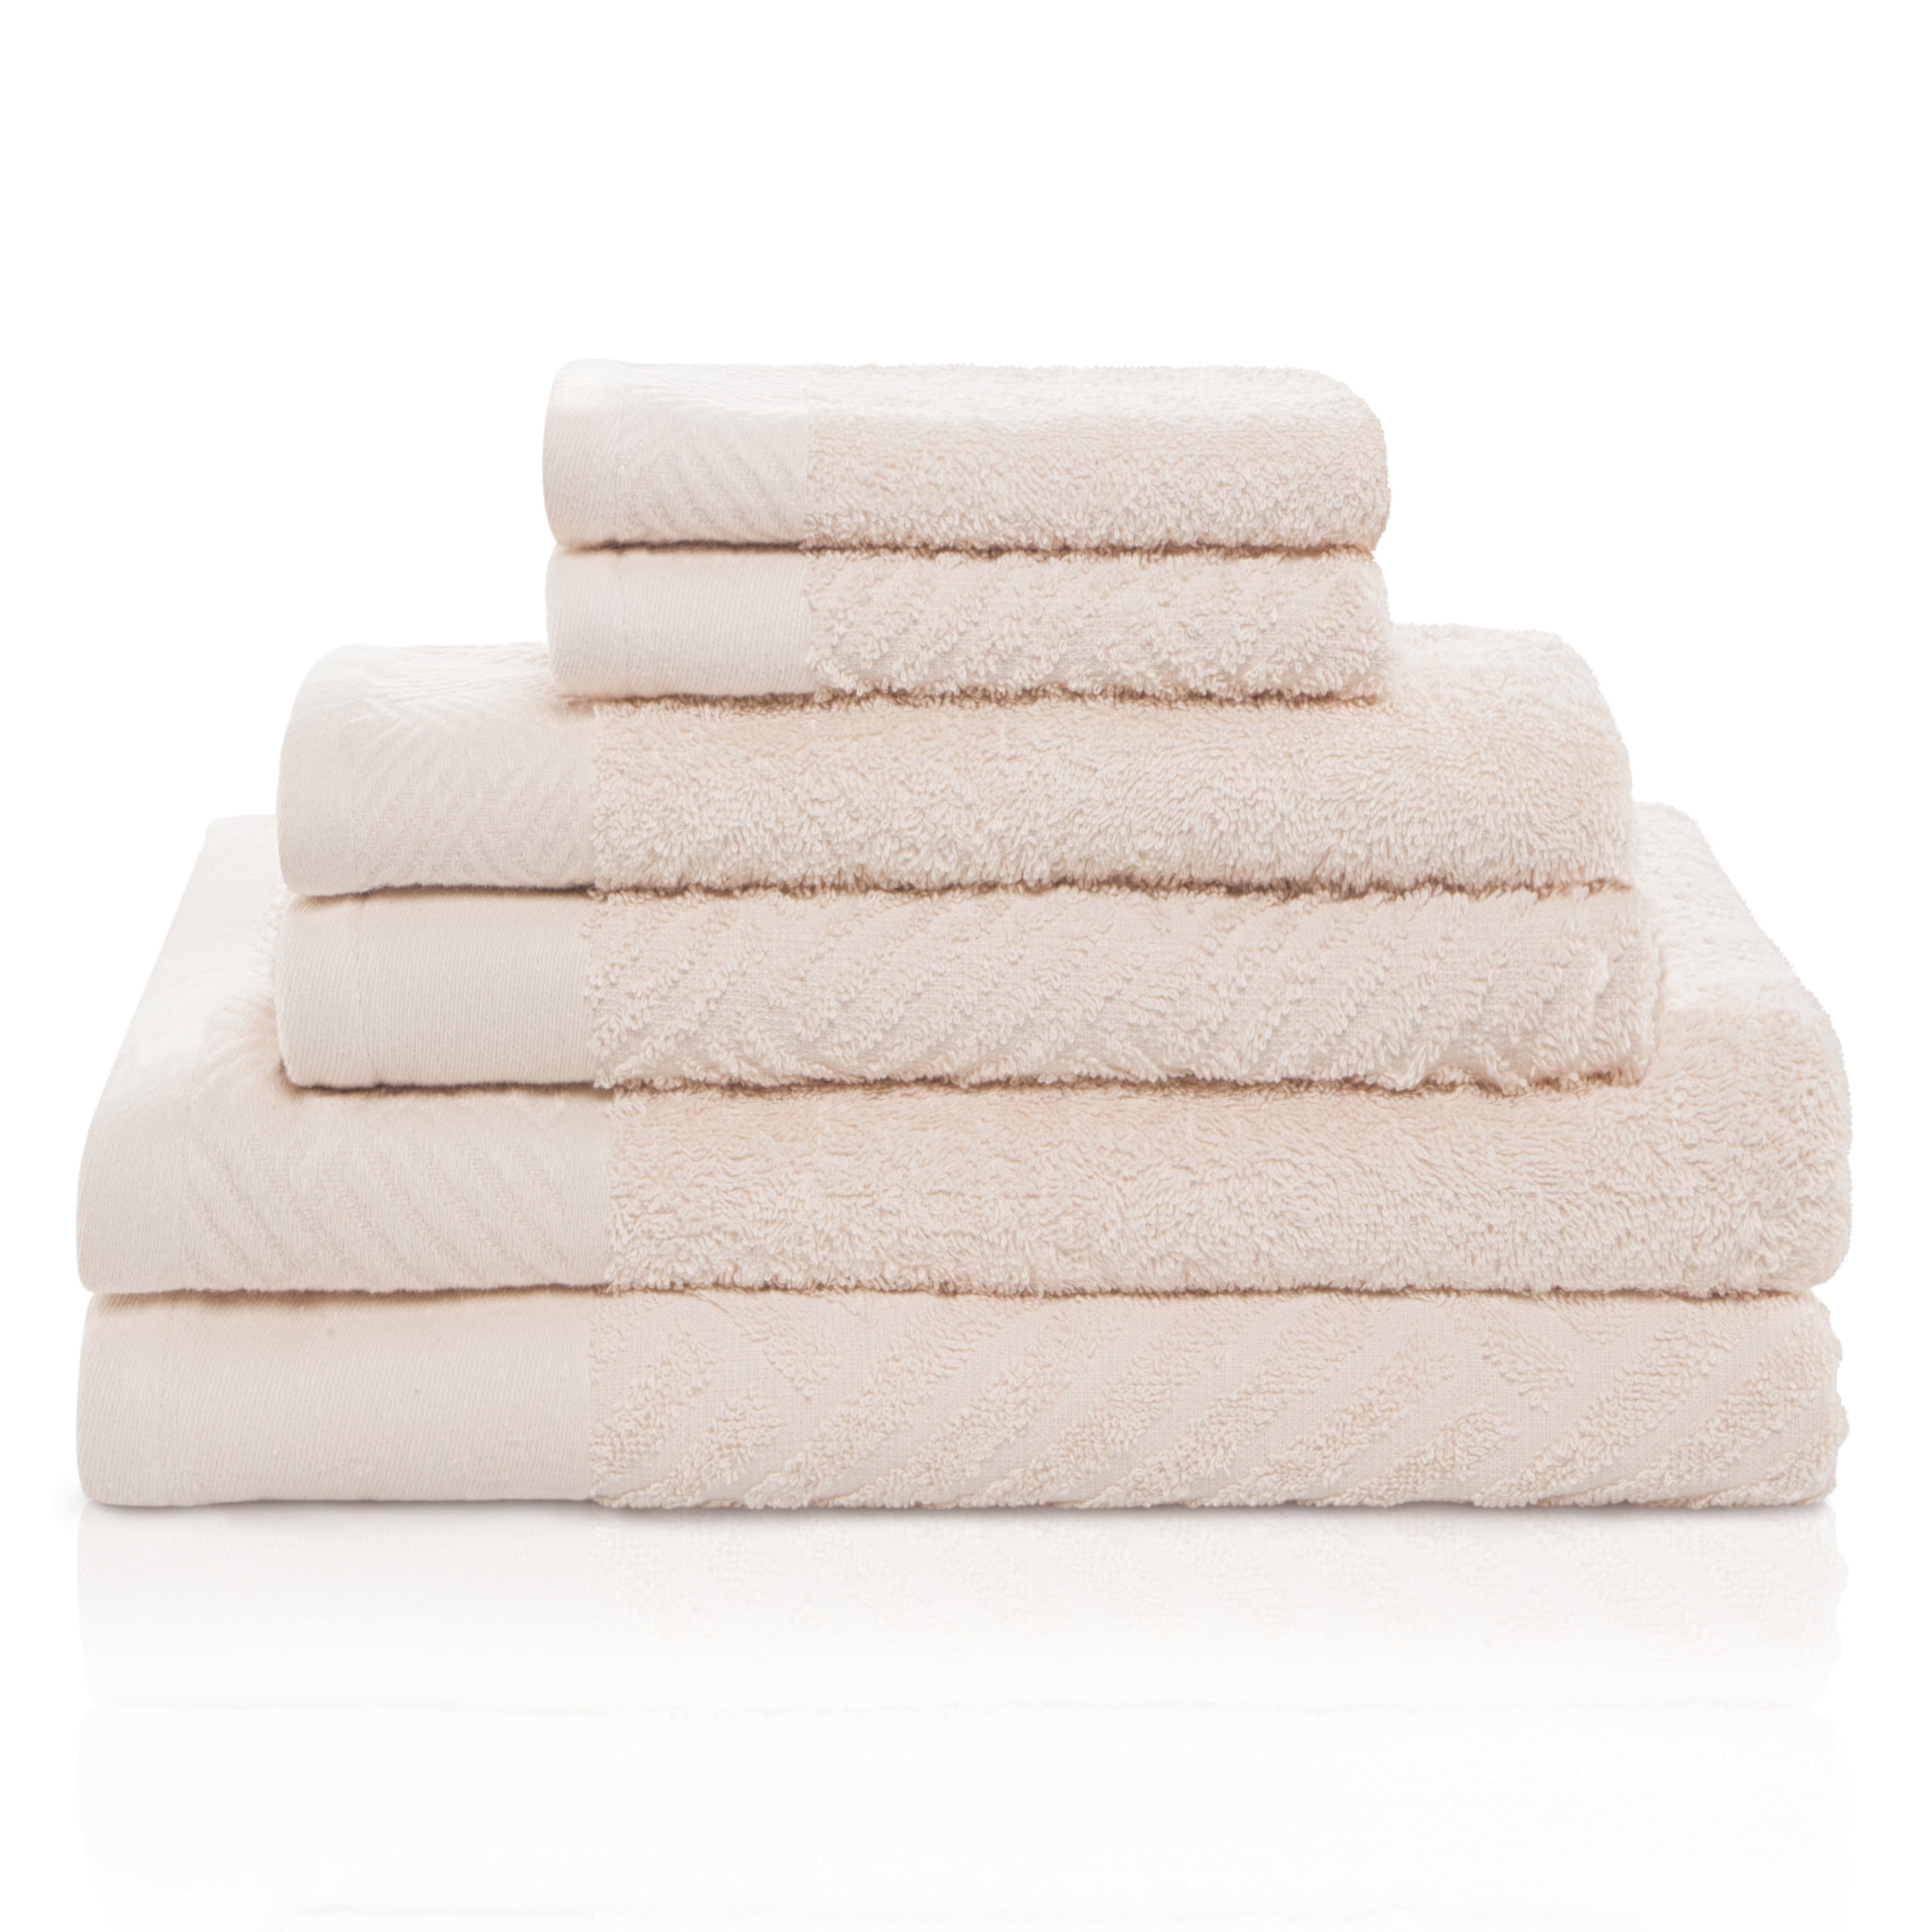 Living :: Bath & bed linen :: BYFT Spring Hand Towel 50 x 100 Cm 100%  MICROFIBER Set of 1, 450 GSM Highly Absorbent Quick Dry High Quality Bath  Linen